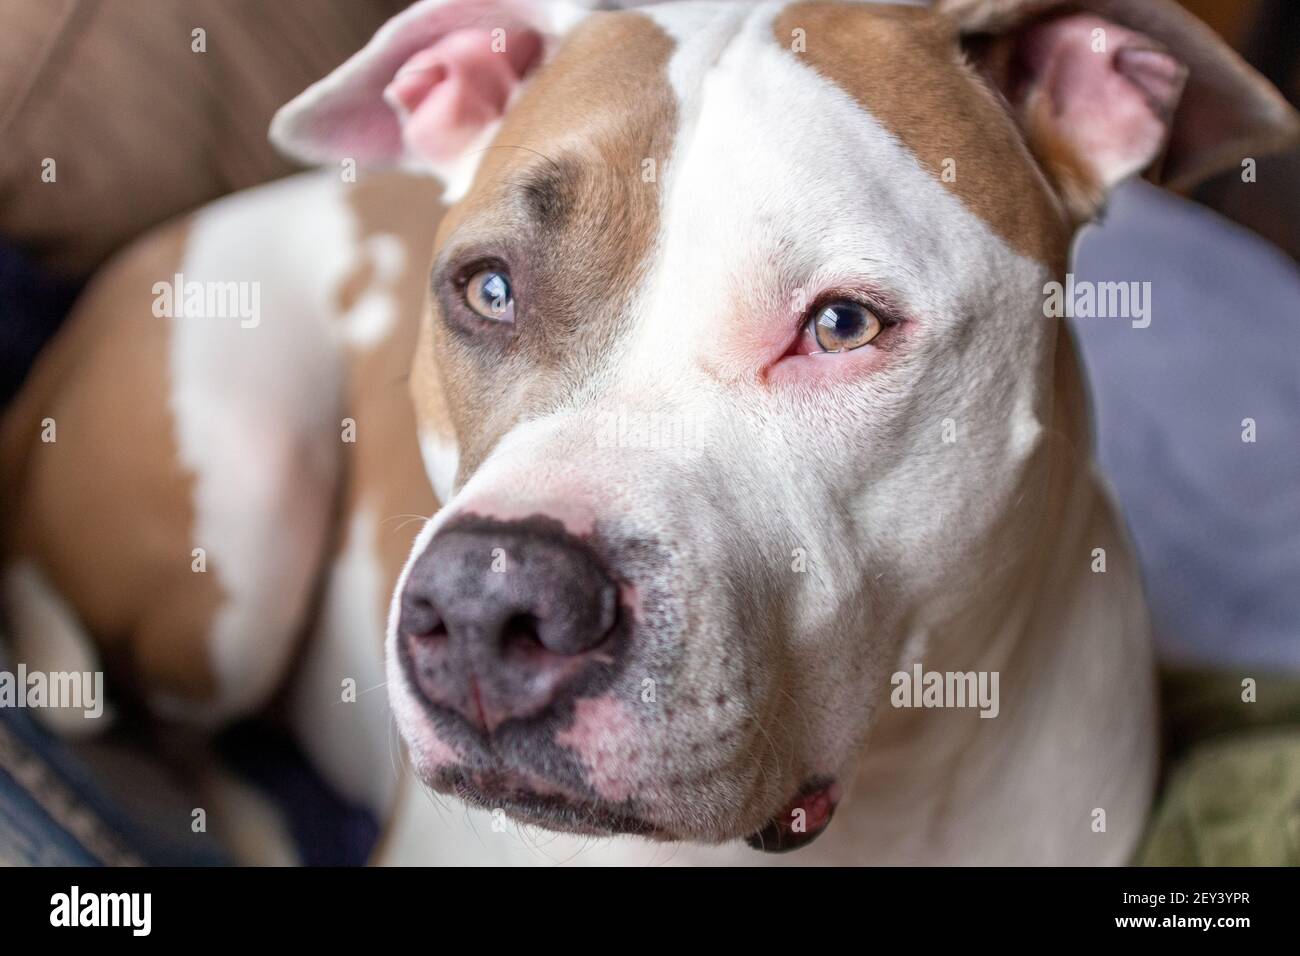 A mixed breed pitbull dog (American Staffordshire Pit Bull Terrier and American Pit Bull Terrier) (Canis lupus familiaris) looks alert. Stock Photo